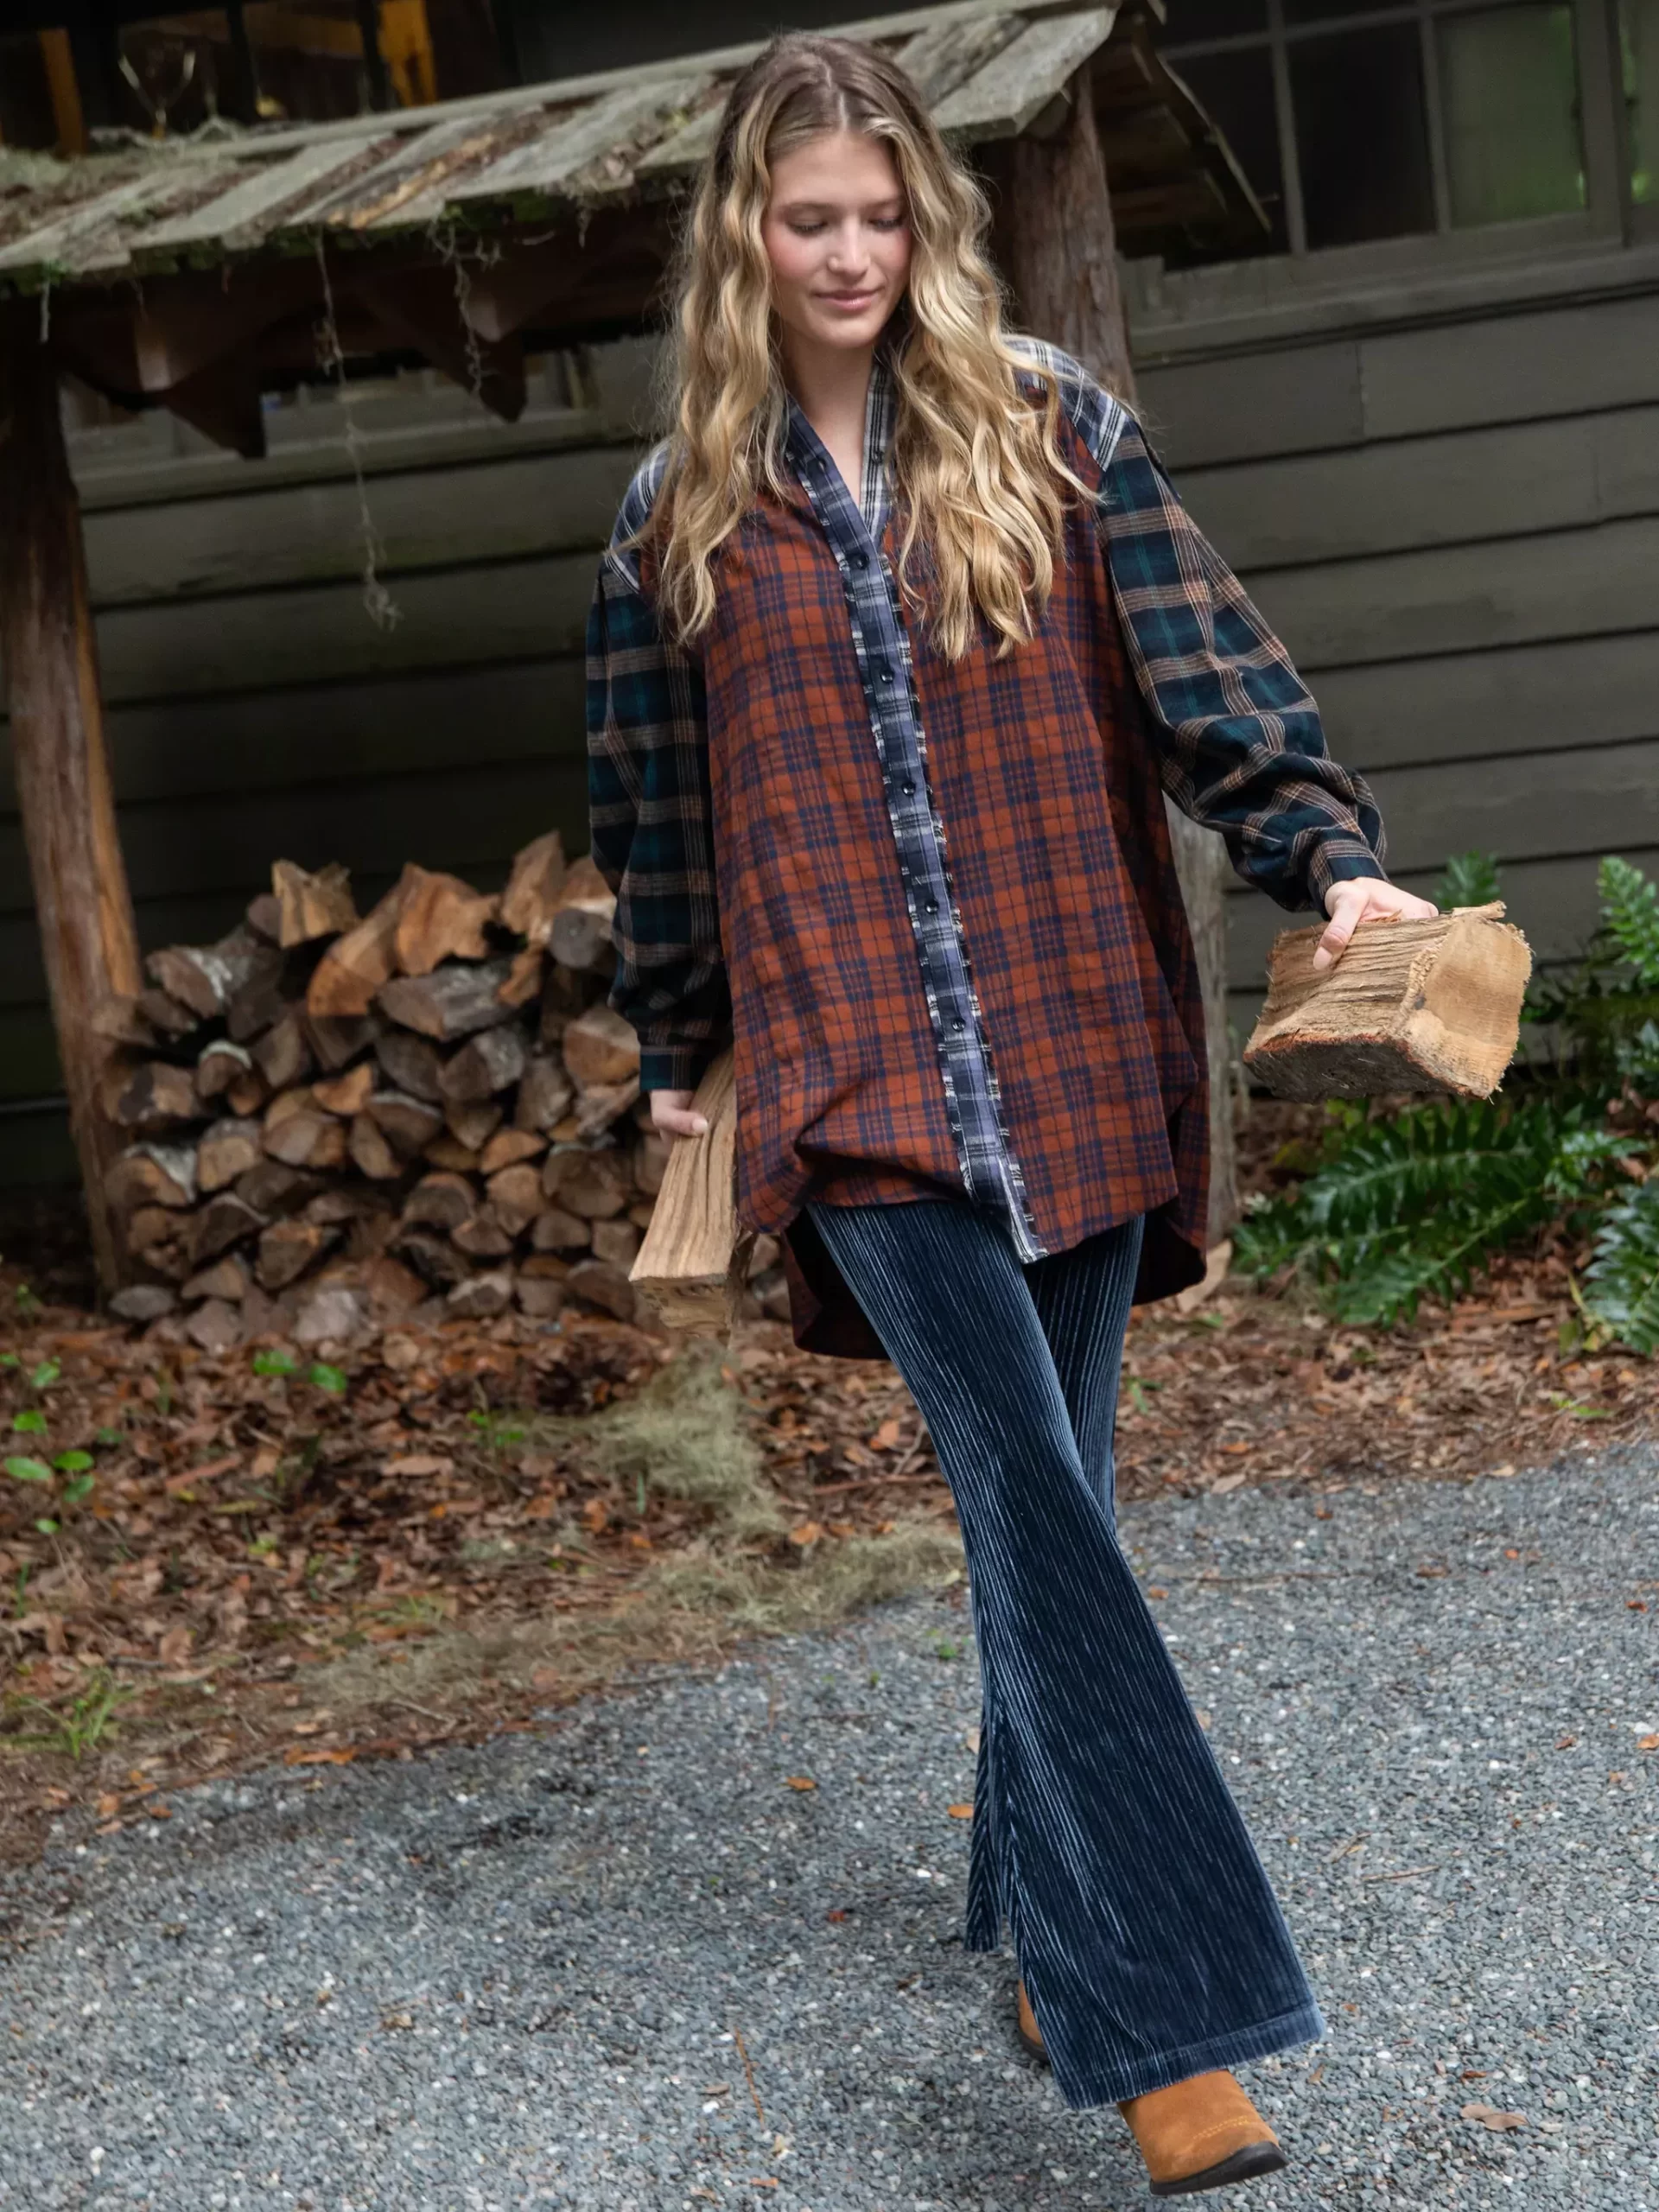 Plaid Tunic Outfit Ideas